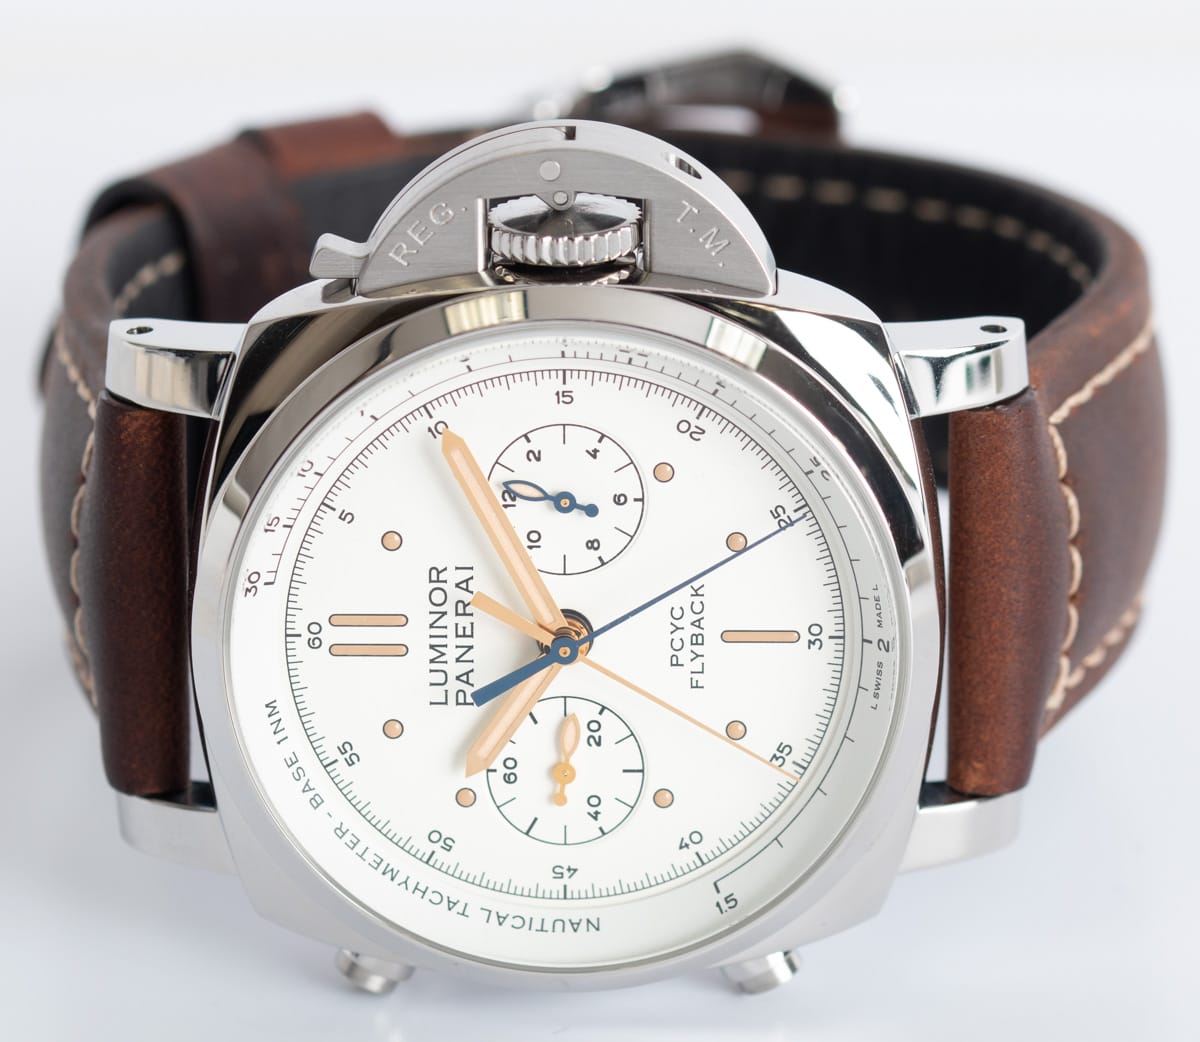 Front View of Luminor 1950 PCYC Flyback Chronograph